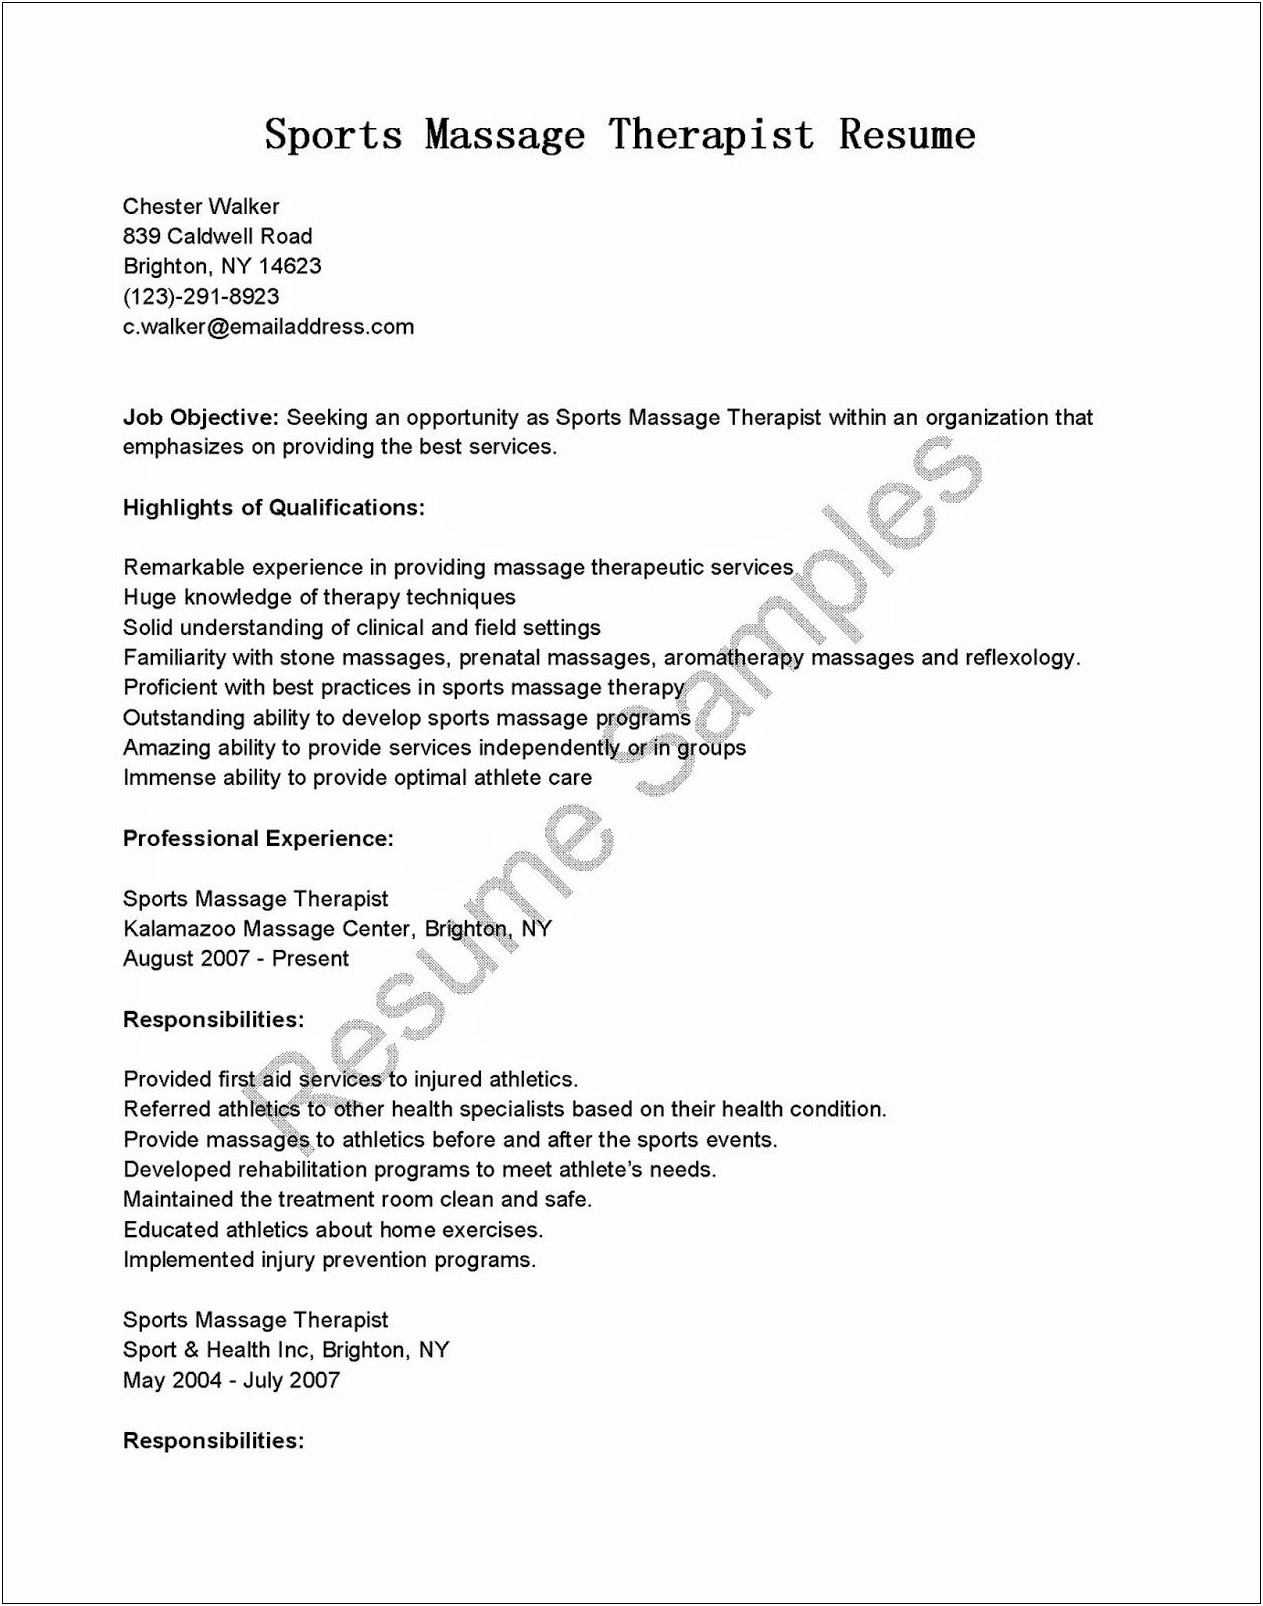 Free Resume Samples For Massage Therapist